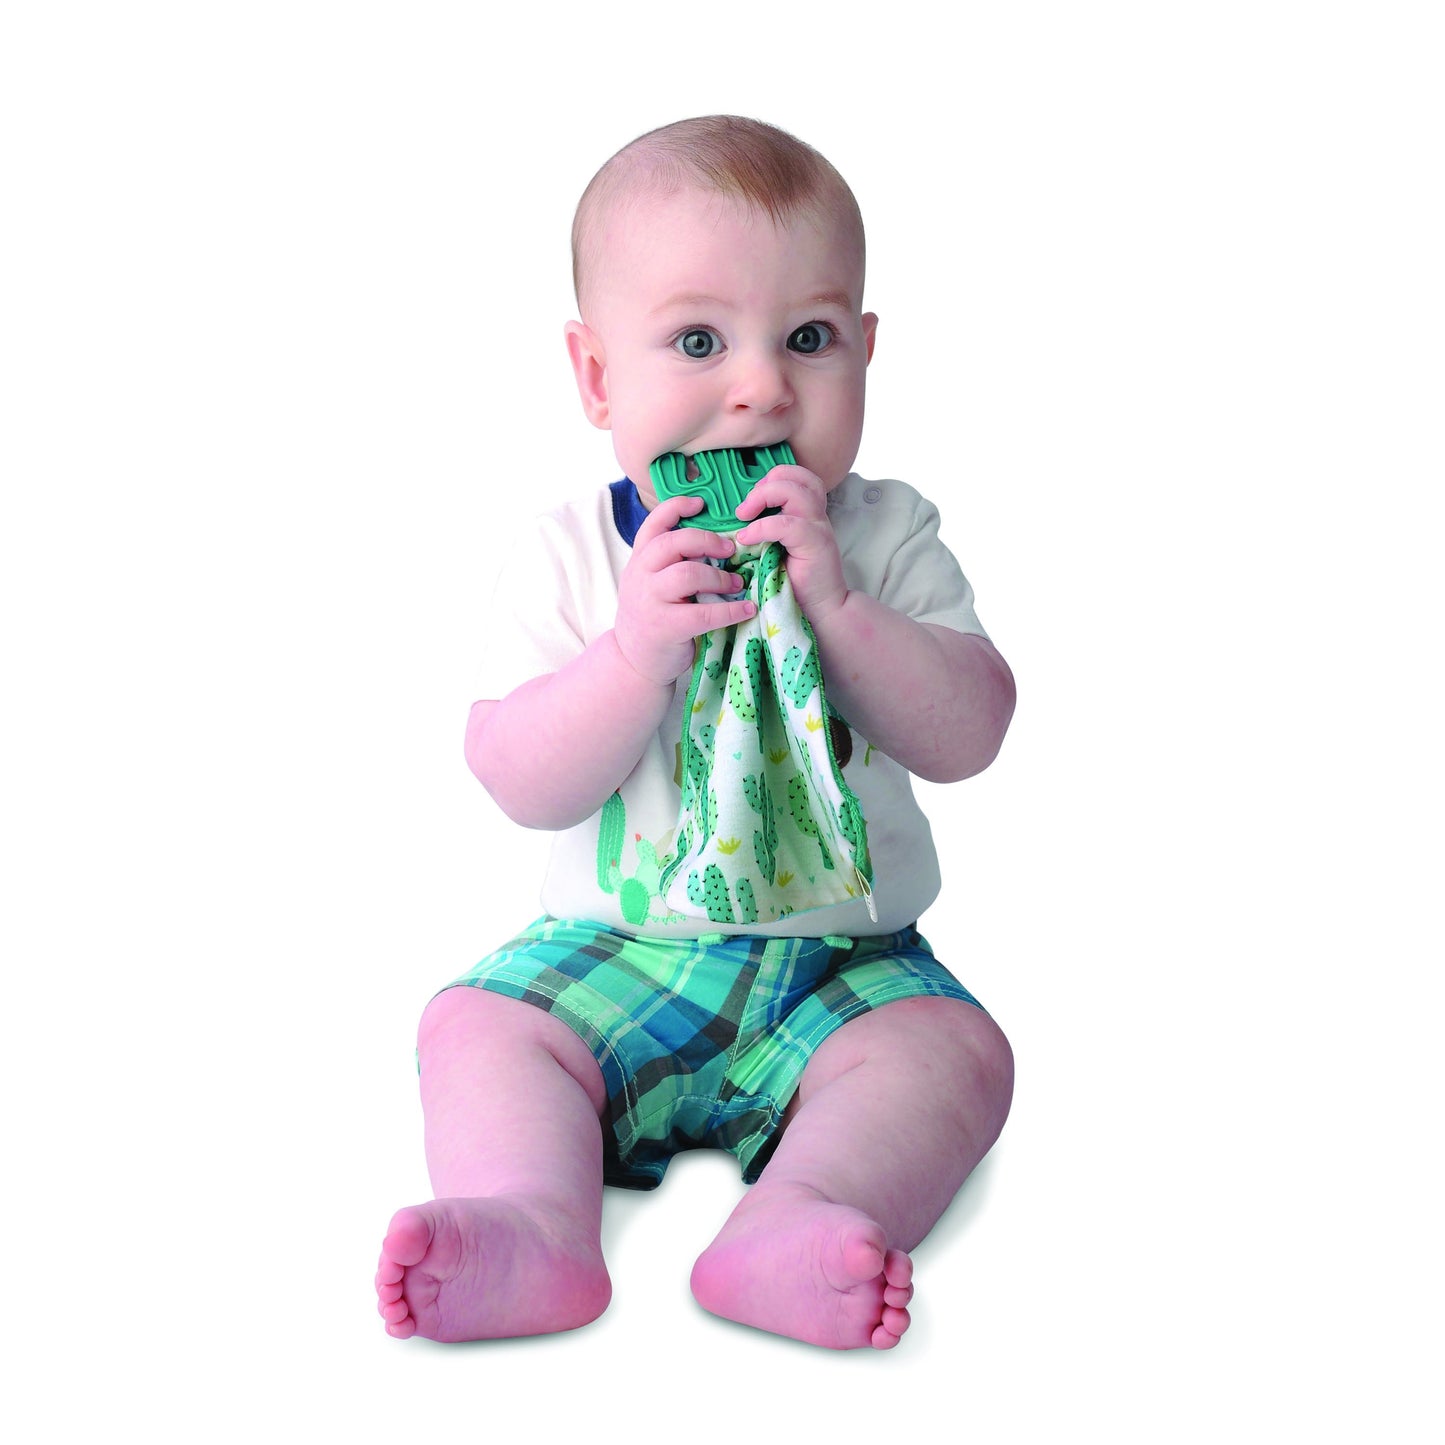 a convenient teether and cozy blanket for baby. Designed to target baby's emerging front& eye teeth as well as early molars.  The soft blanket is perfect for snuggling and absorbing drool